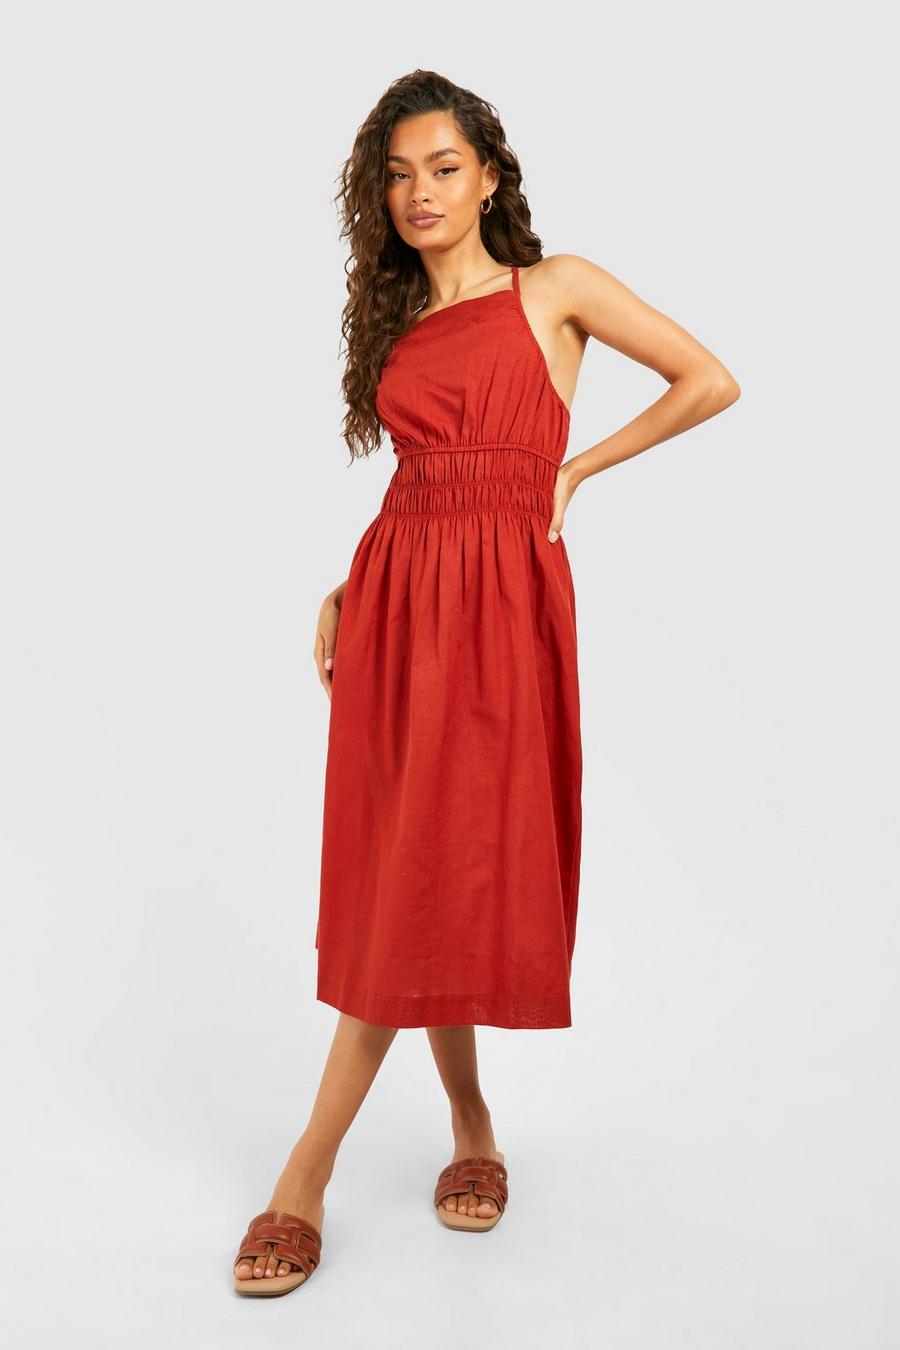 Red Wedding Guest Dresses